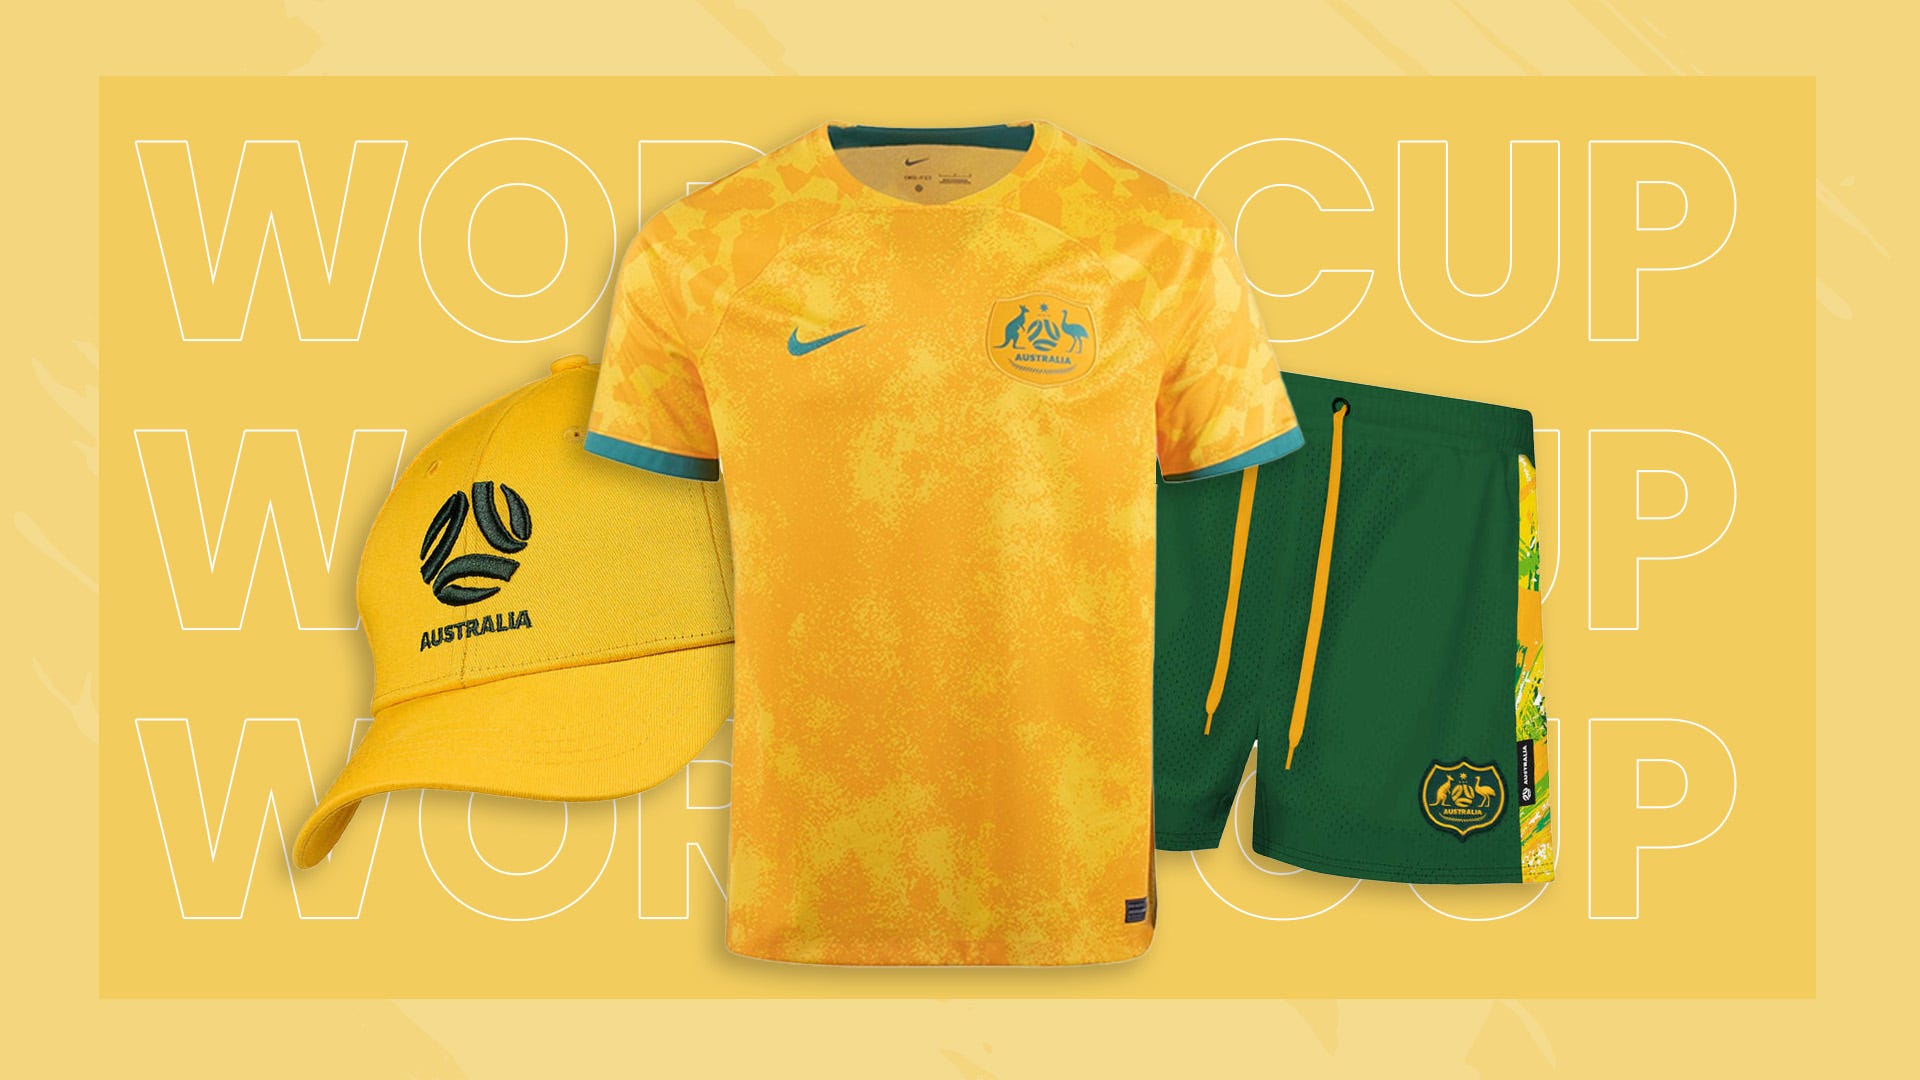 Australia World Cup kit and merch 2022 Where can I buy it and how much